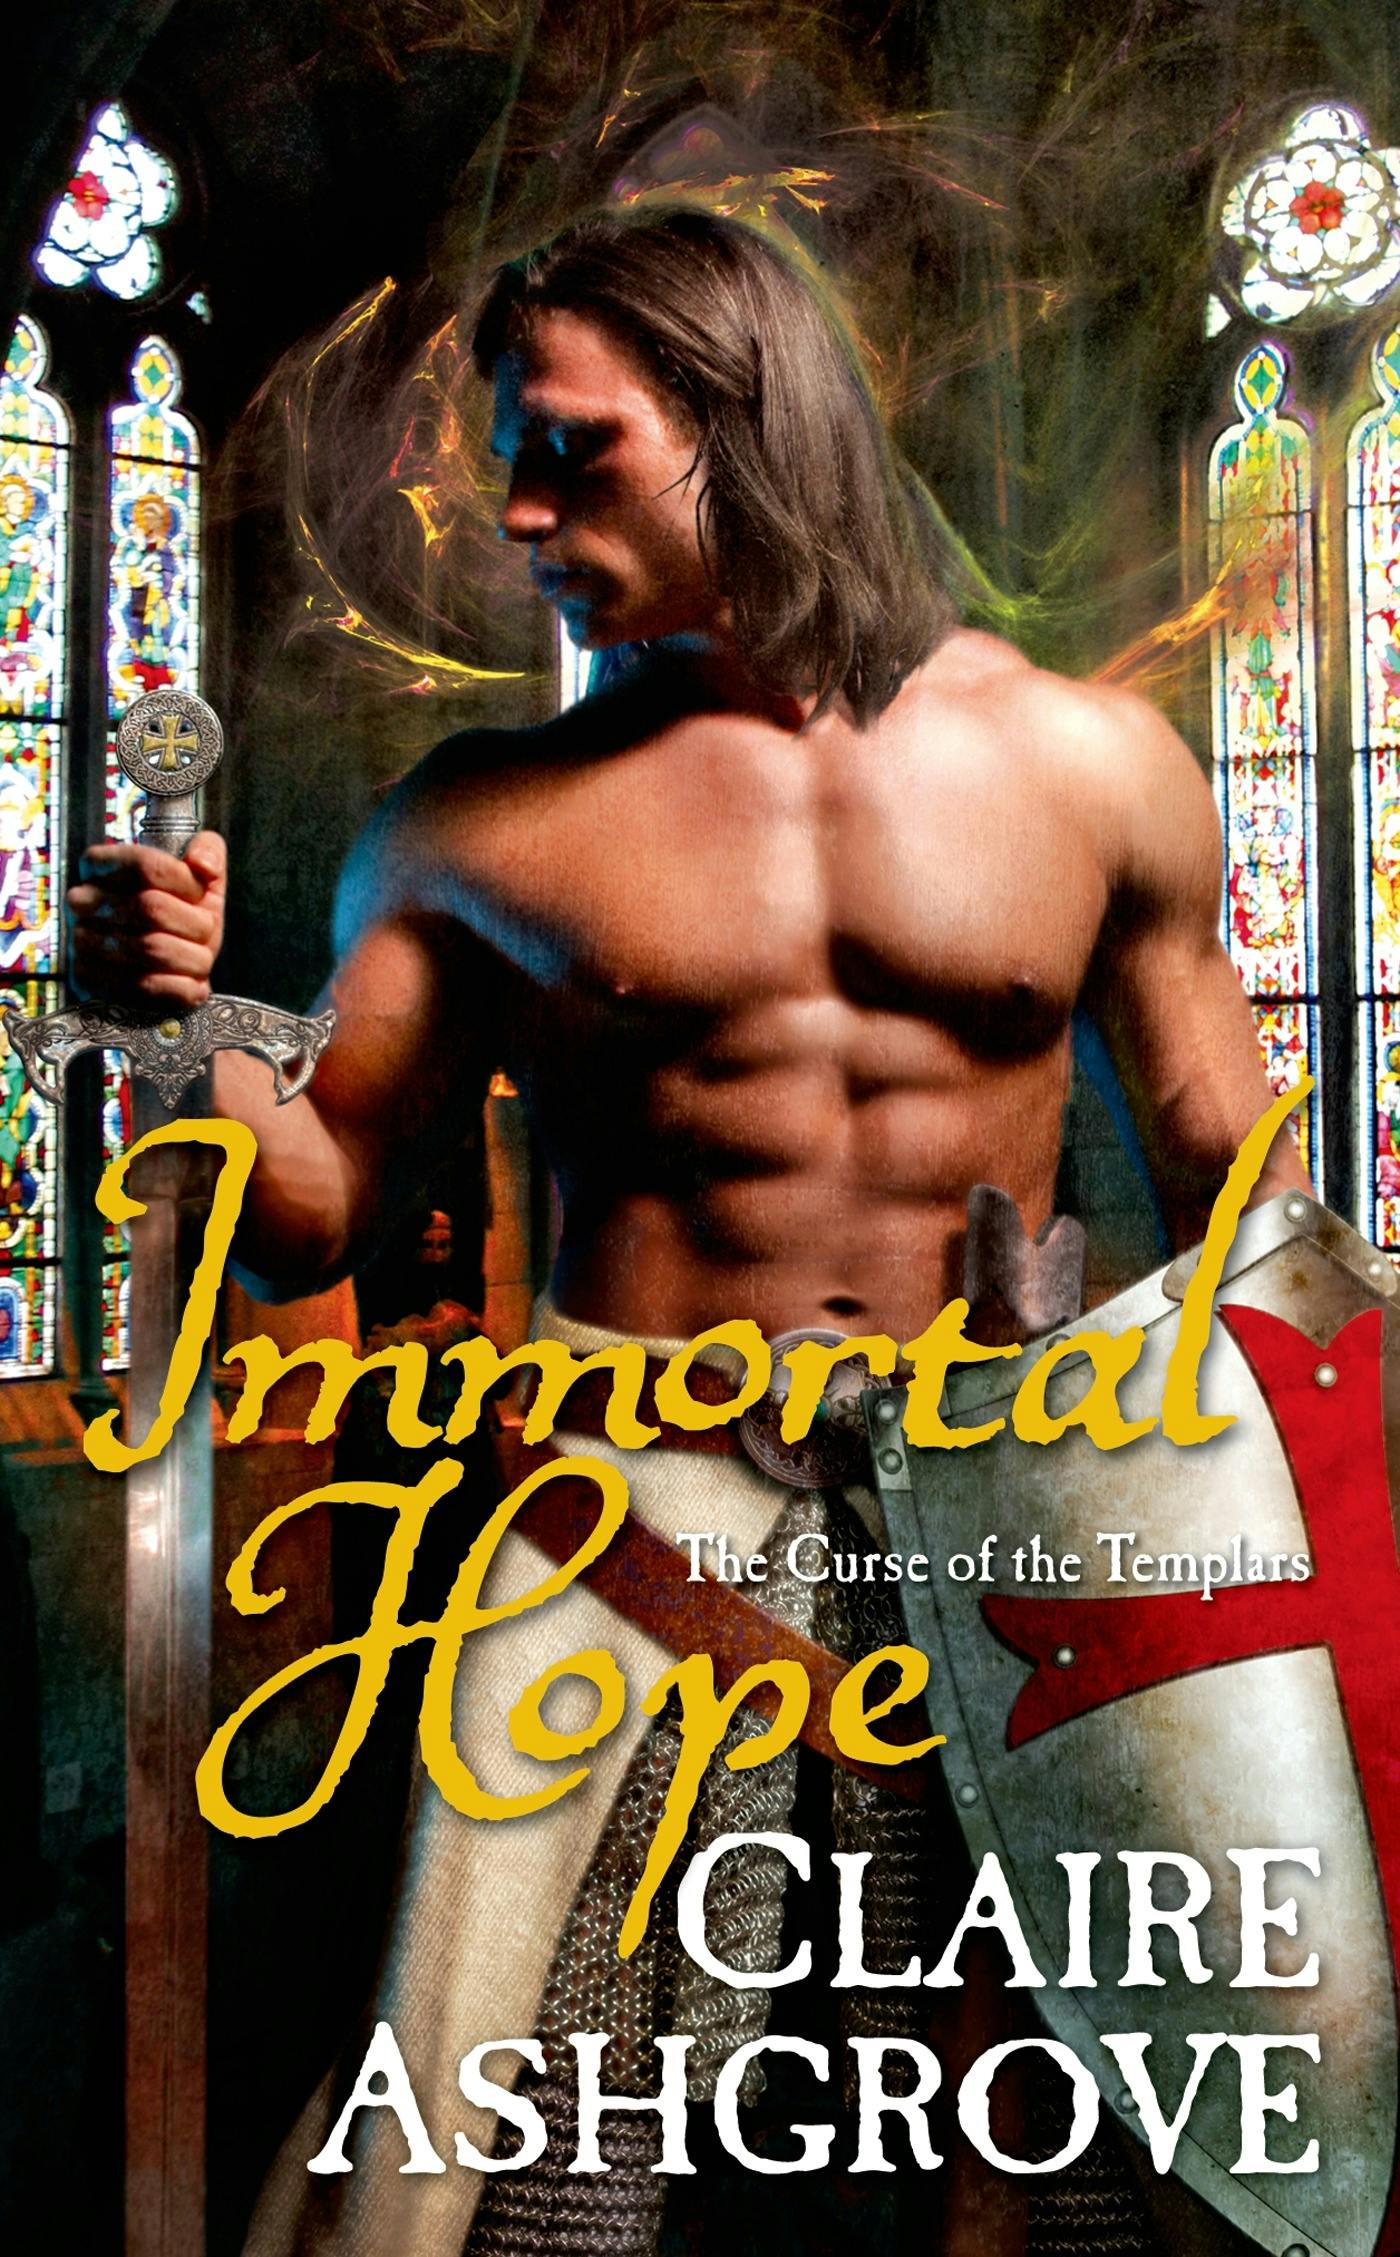 Cover for the book titled as: Immortal Hope